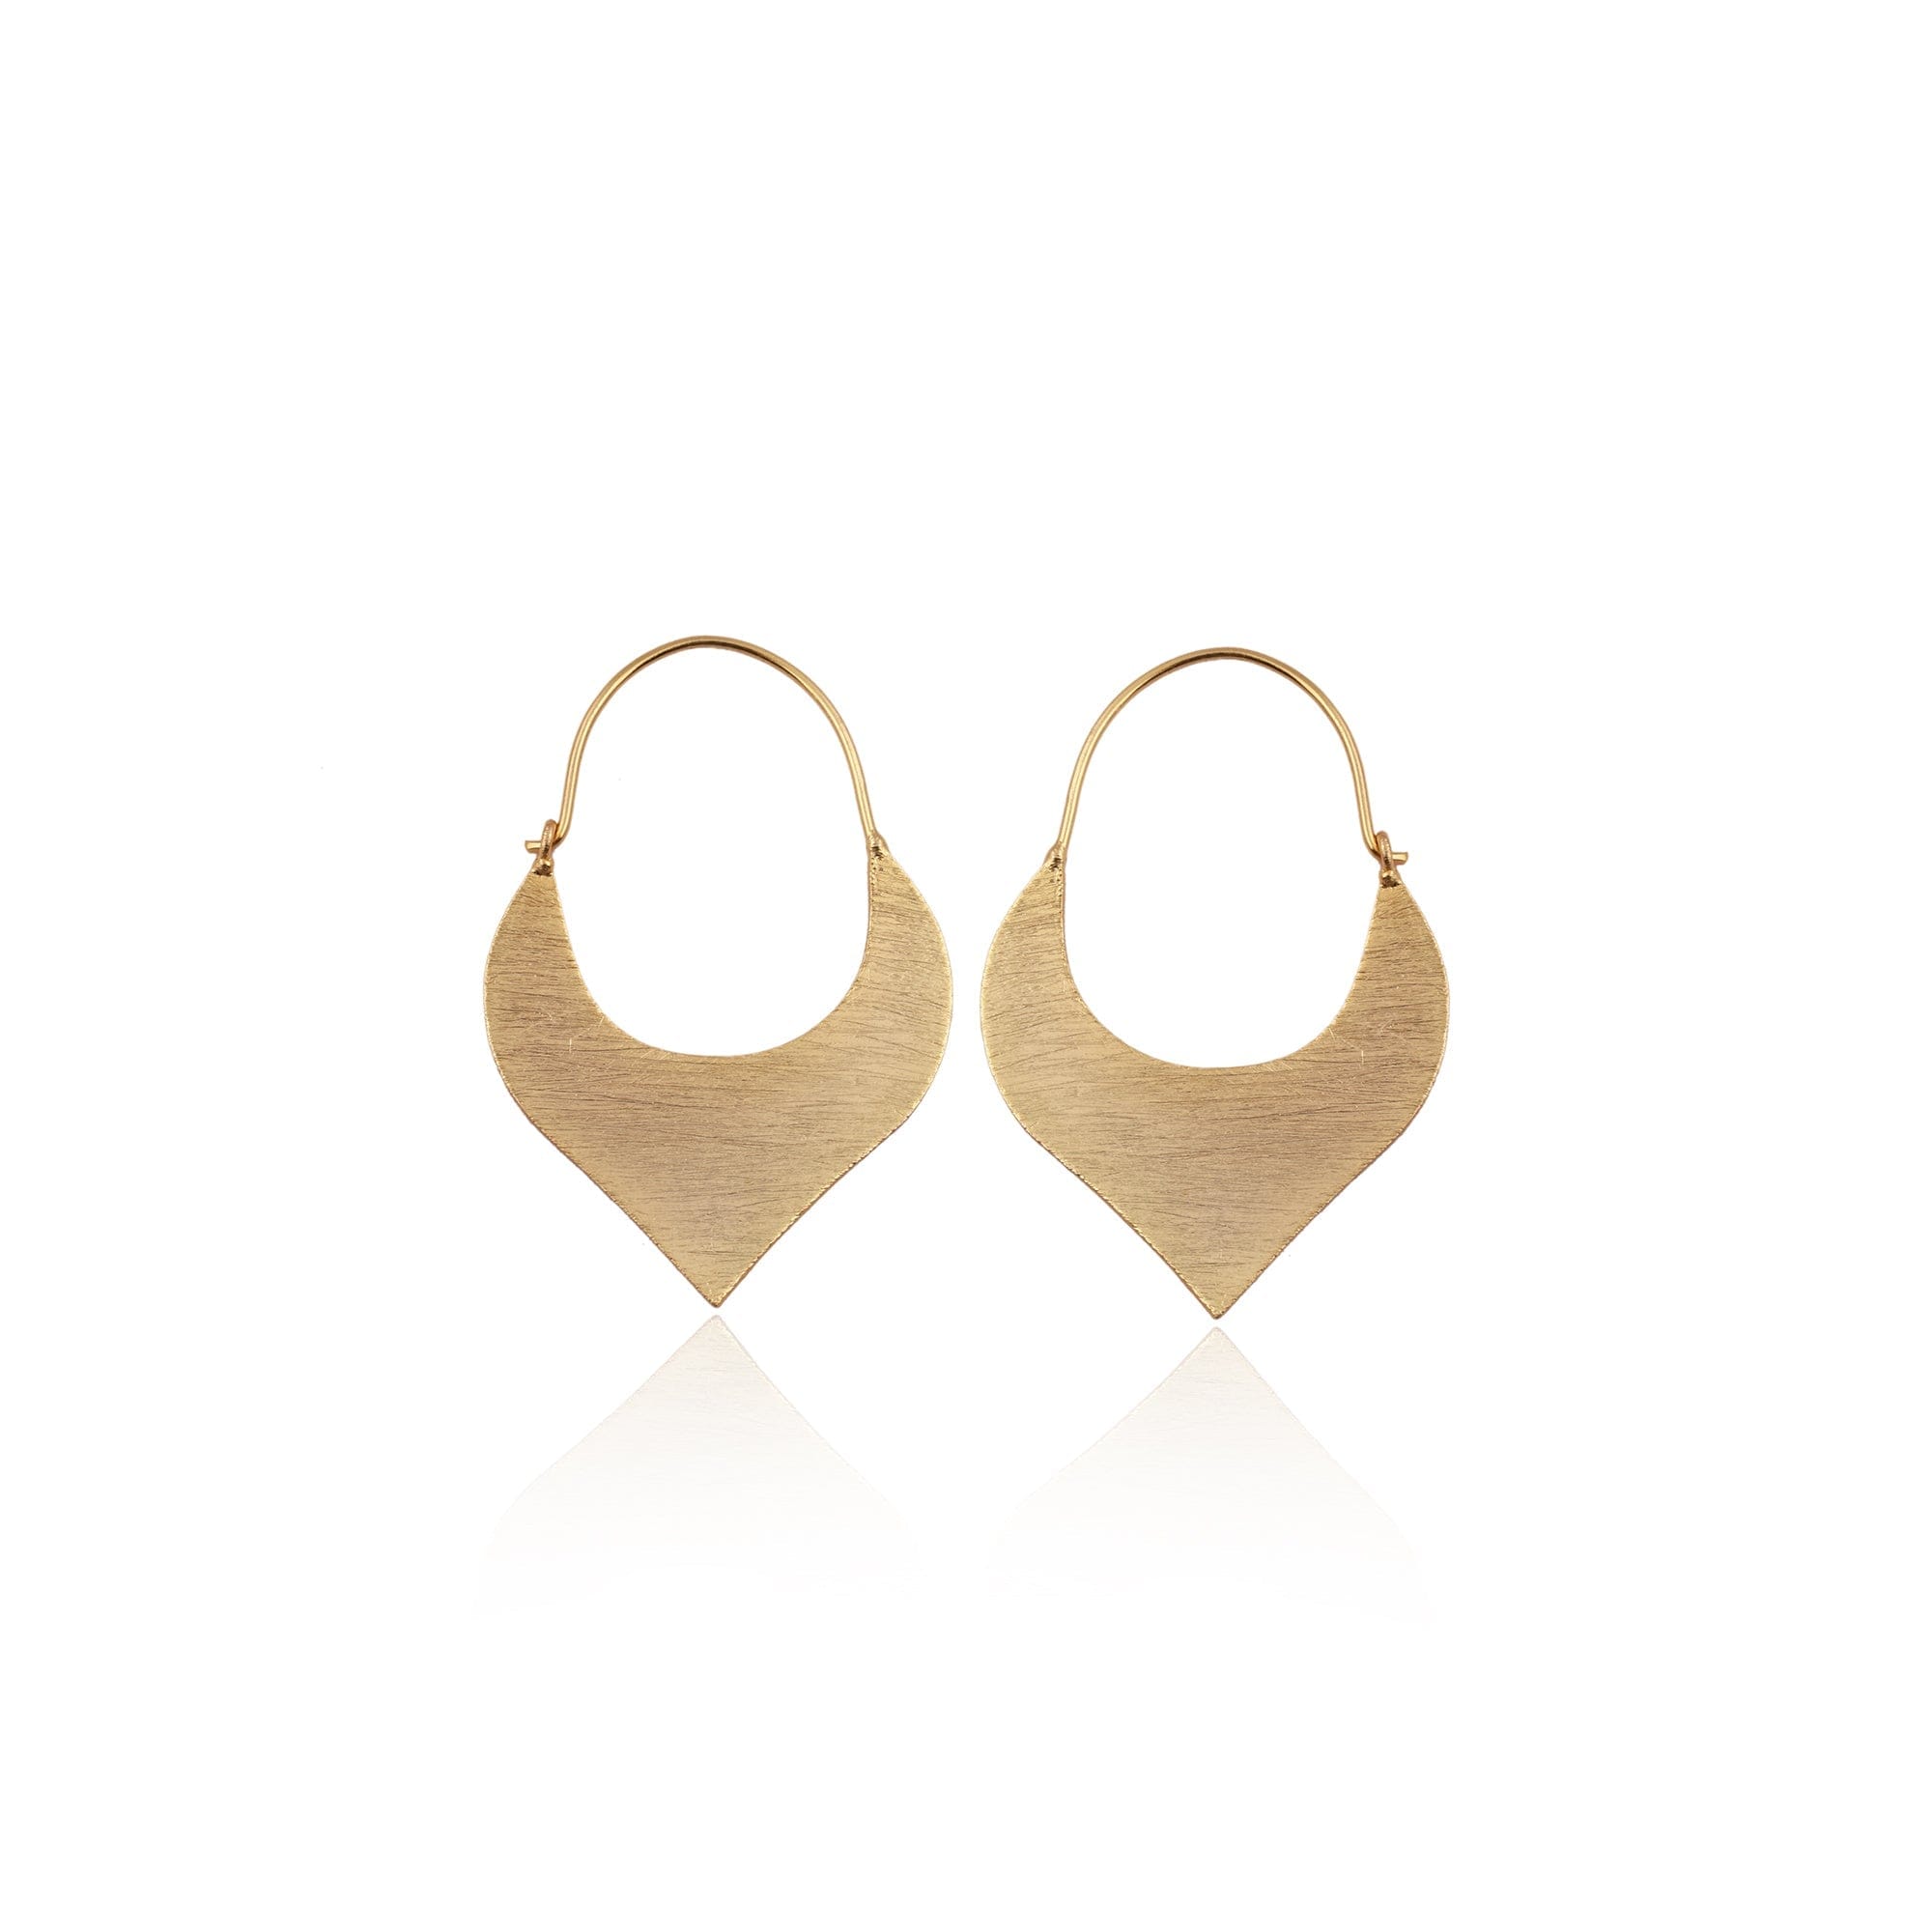 Textured Statement Earrings, Gold plated. Handmade